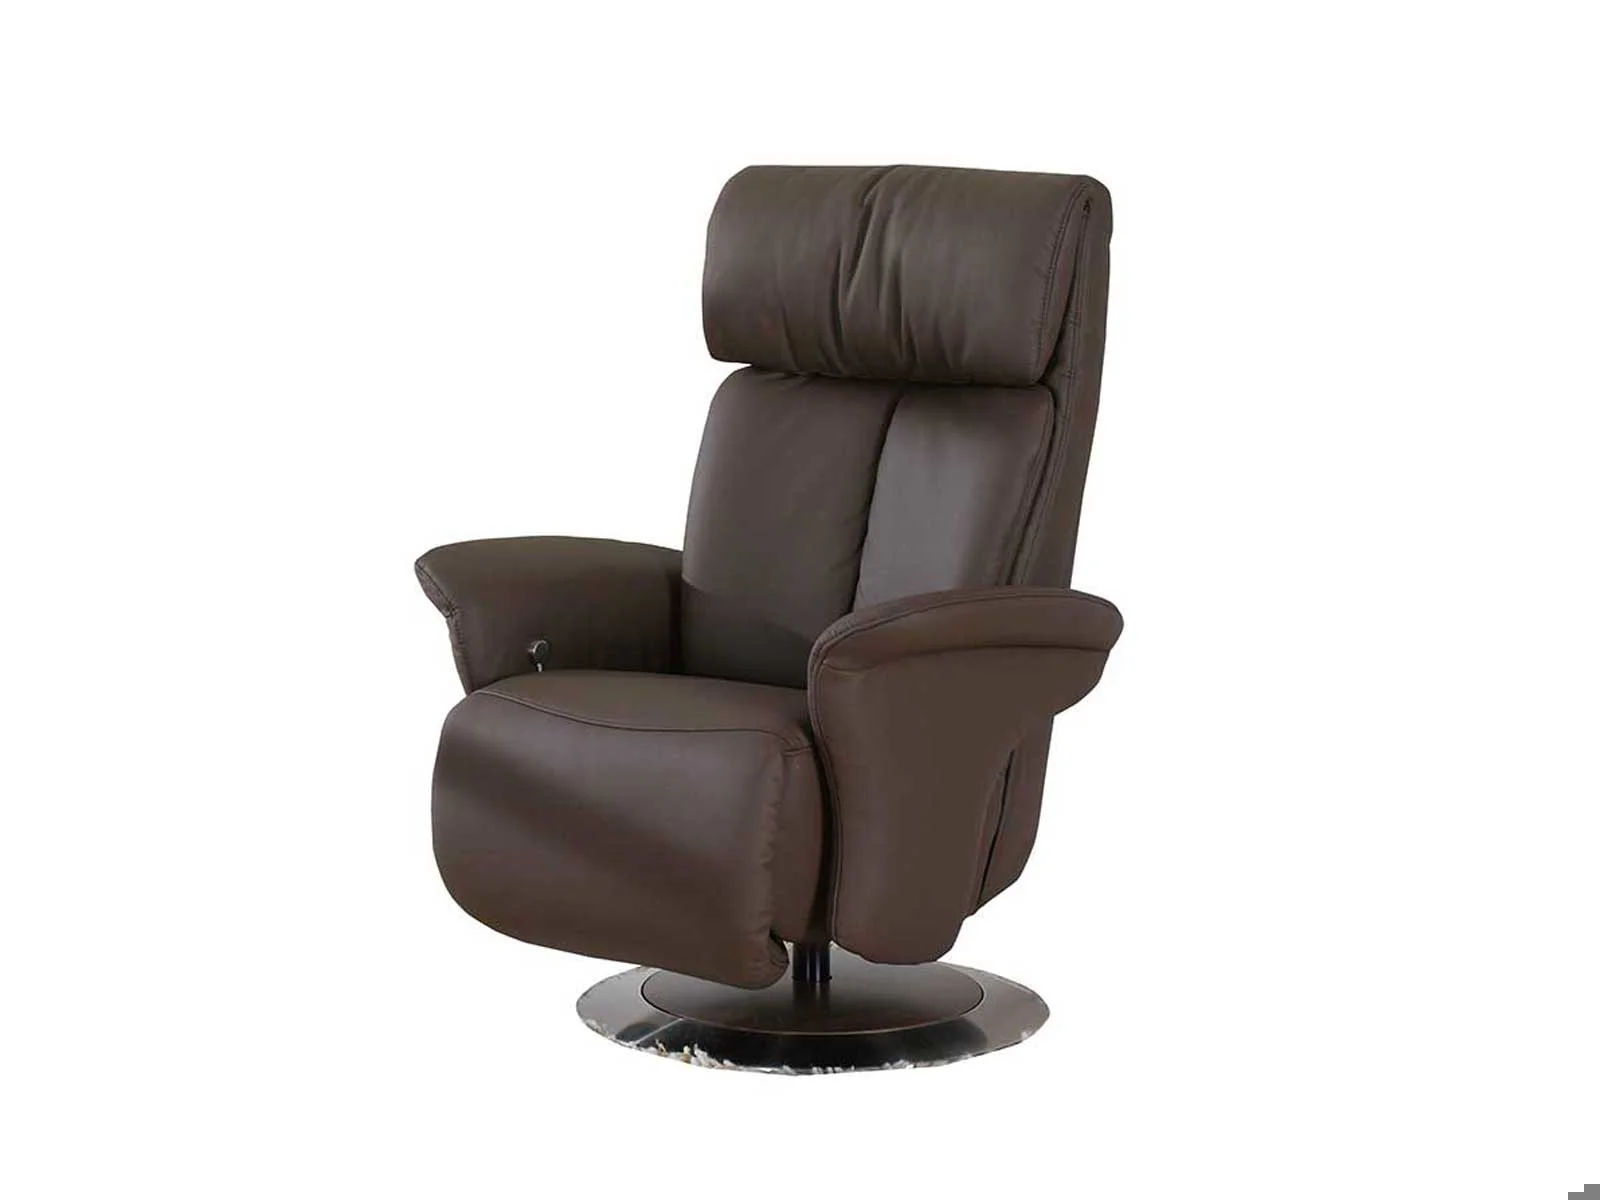 Large Manual Relaxer Chair